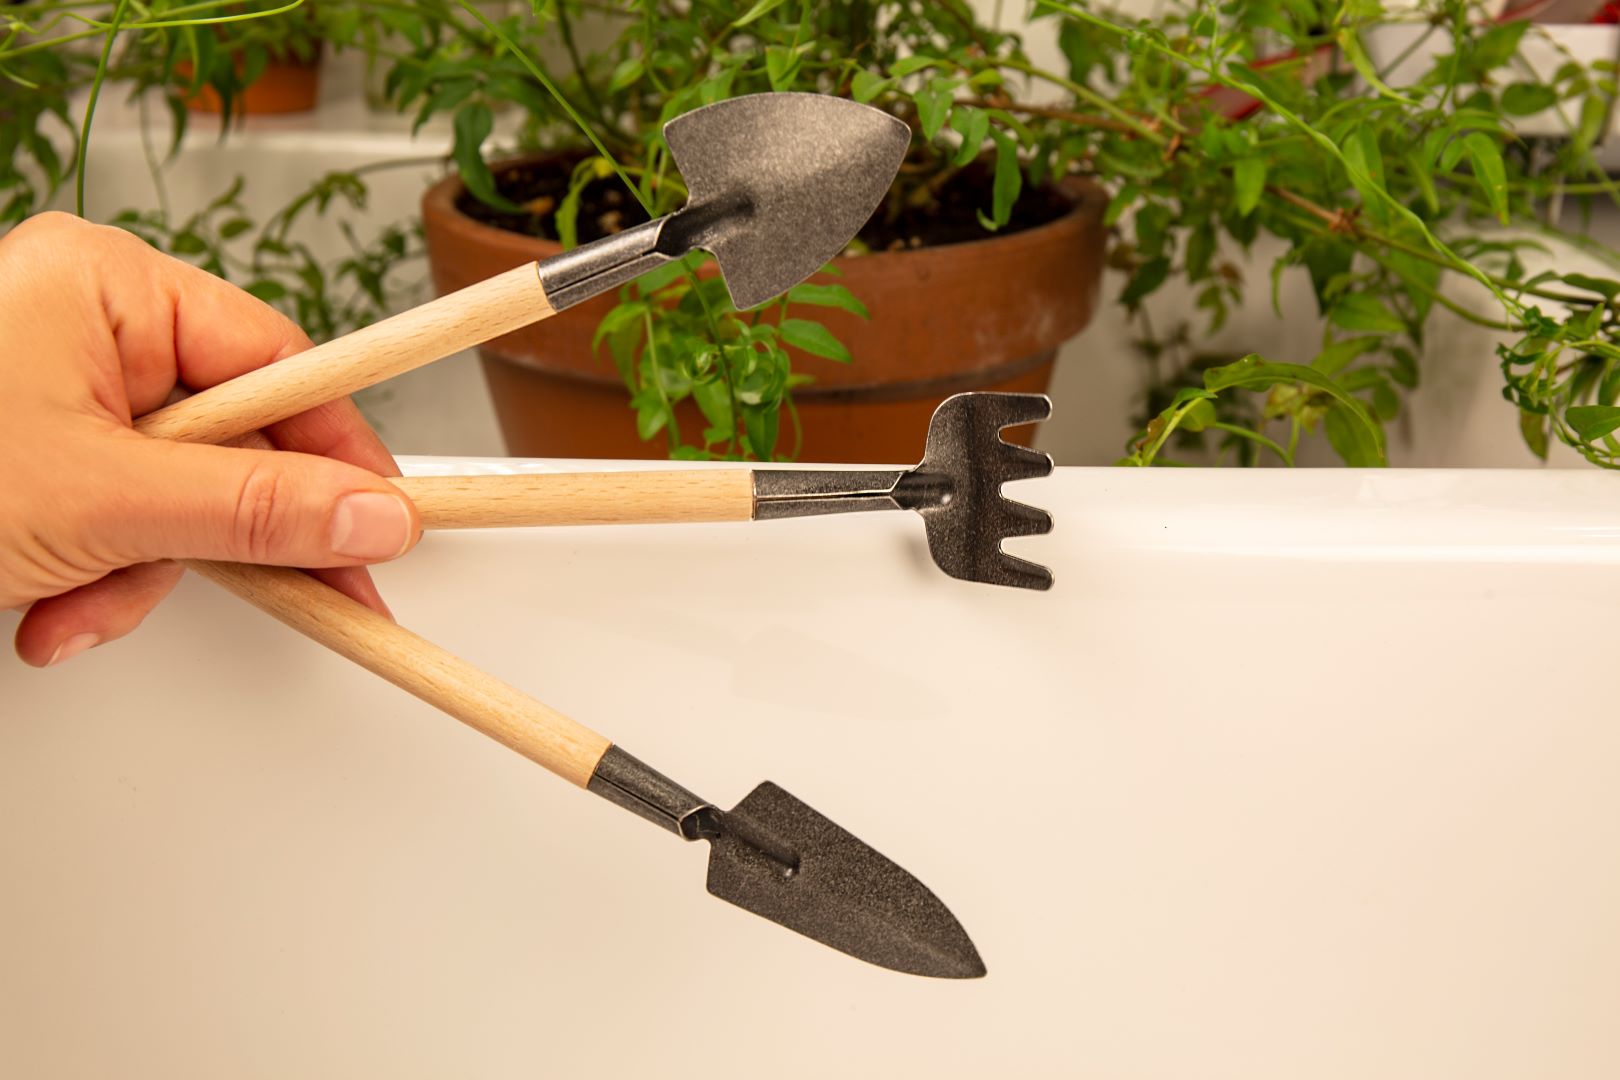 Someone holding a mini rake, spade, and shovel with wooden handles. There is a potted plant in the background.